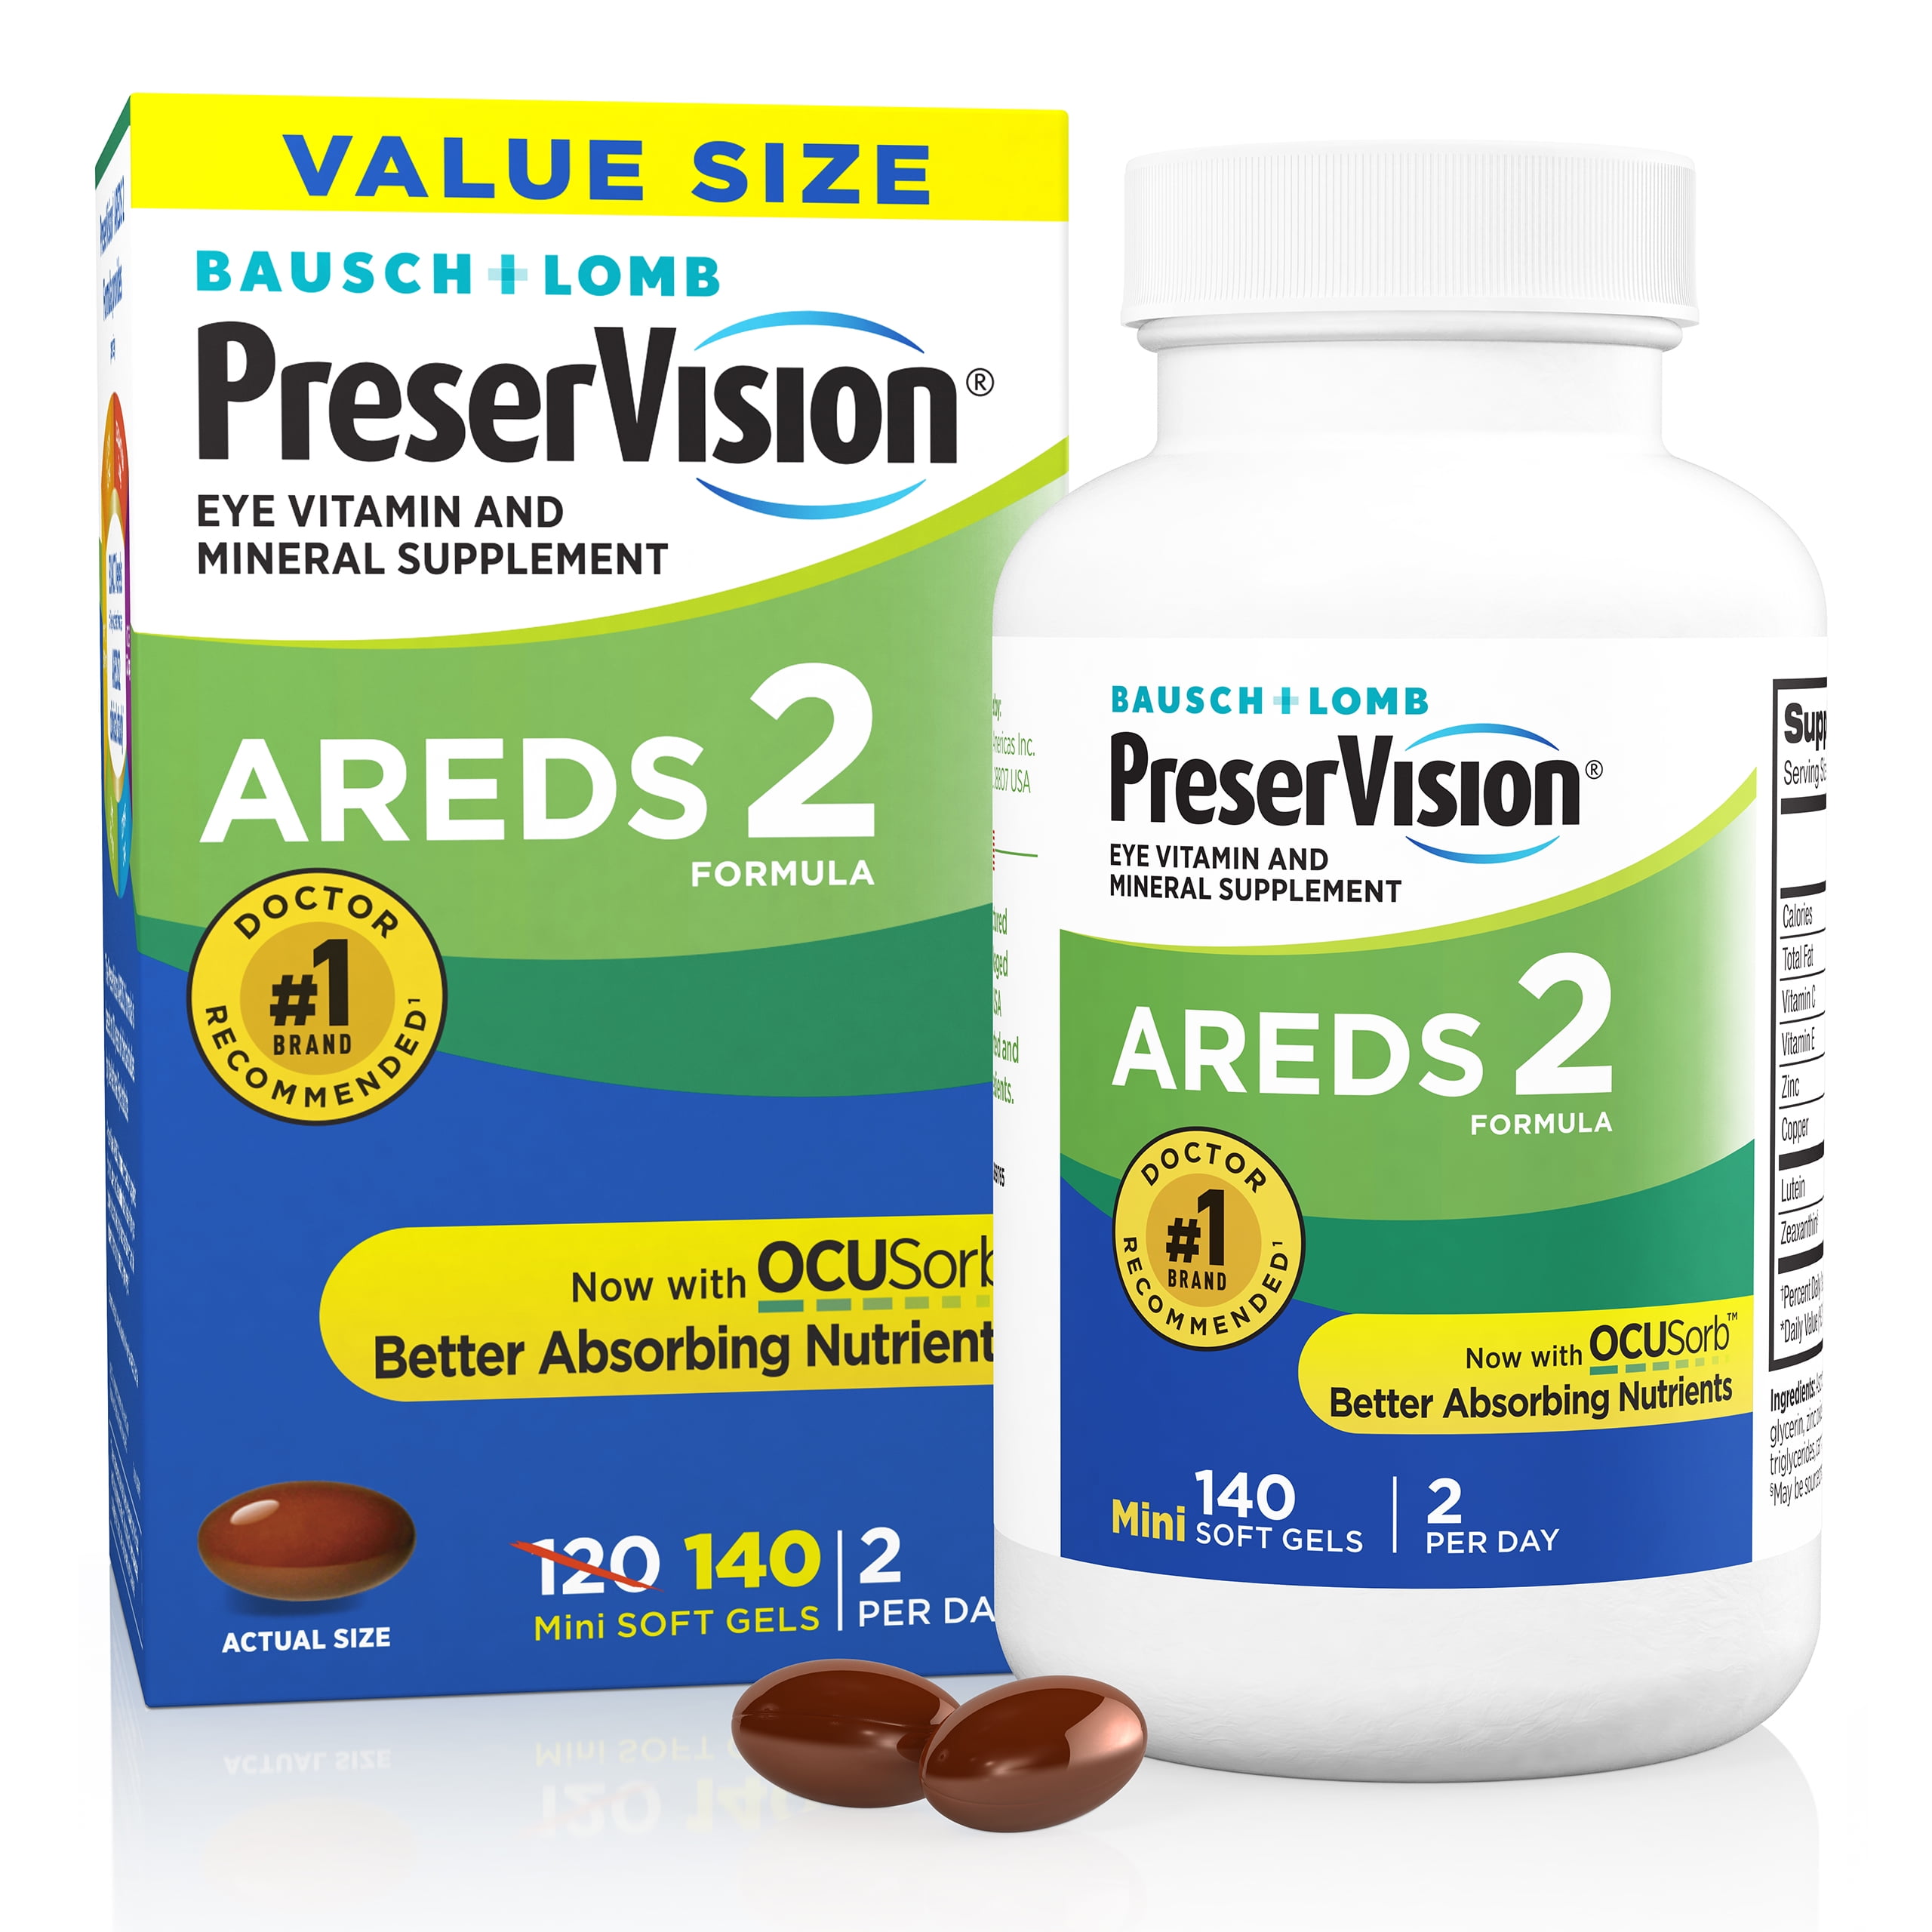 PreserVision AREDS 2 Formula + Multivitamin, Eye Vitamin and Mineral Supplement with Lutein & ZeaxanthinFrom Bausch + Lomb, 140 Soft Gels (MiniGels)